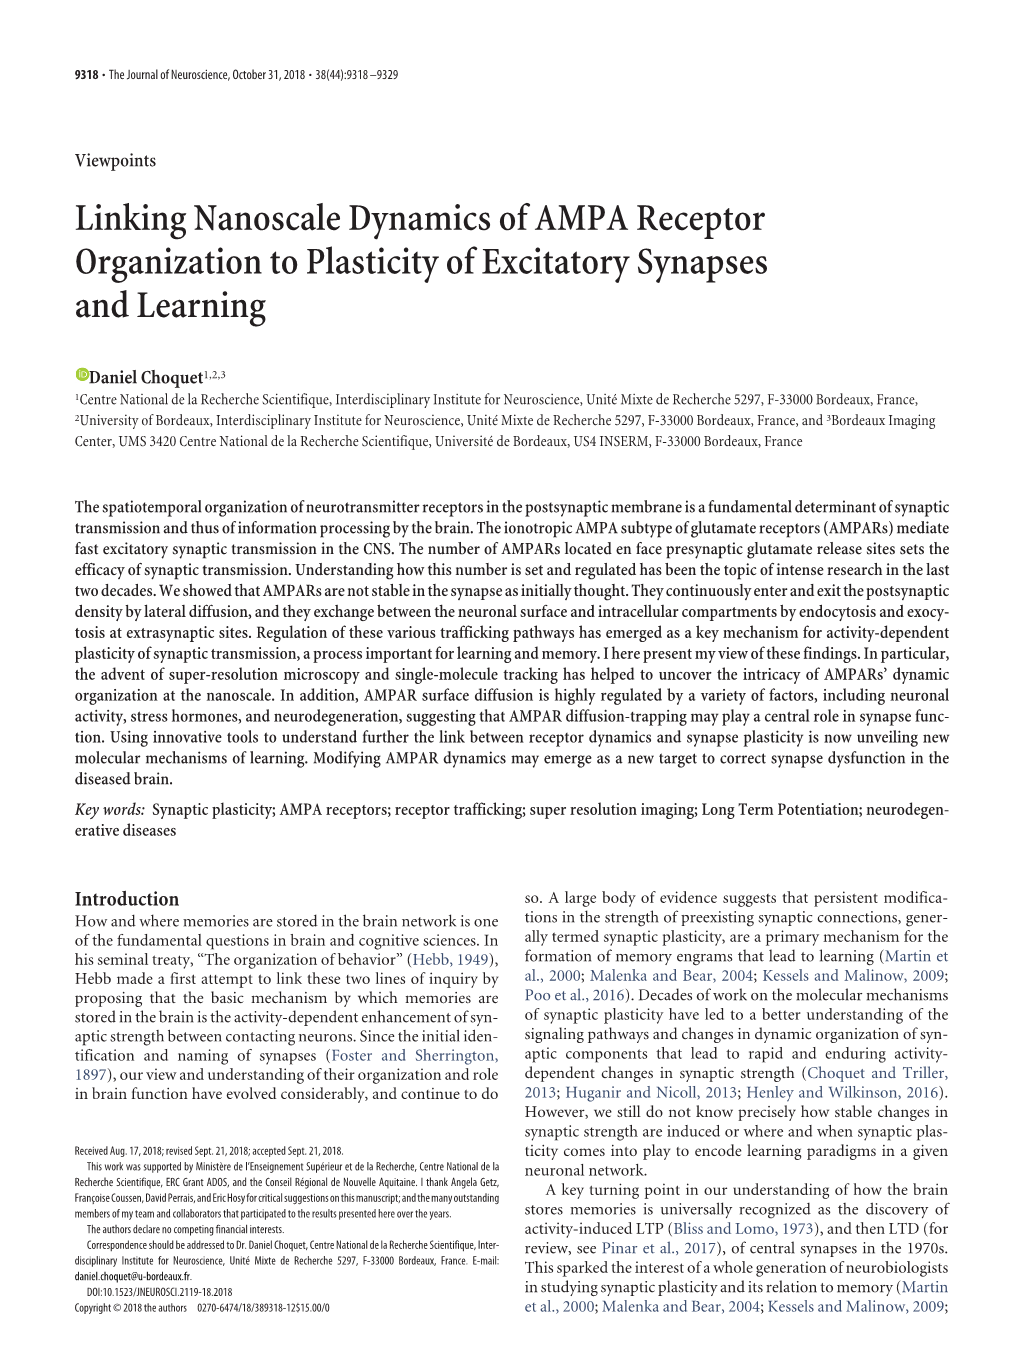 Linking Nanoscale Dynamics of AMPA Receptor Organization to Plasticity of Excitatory Synapses and Learning